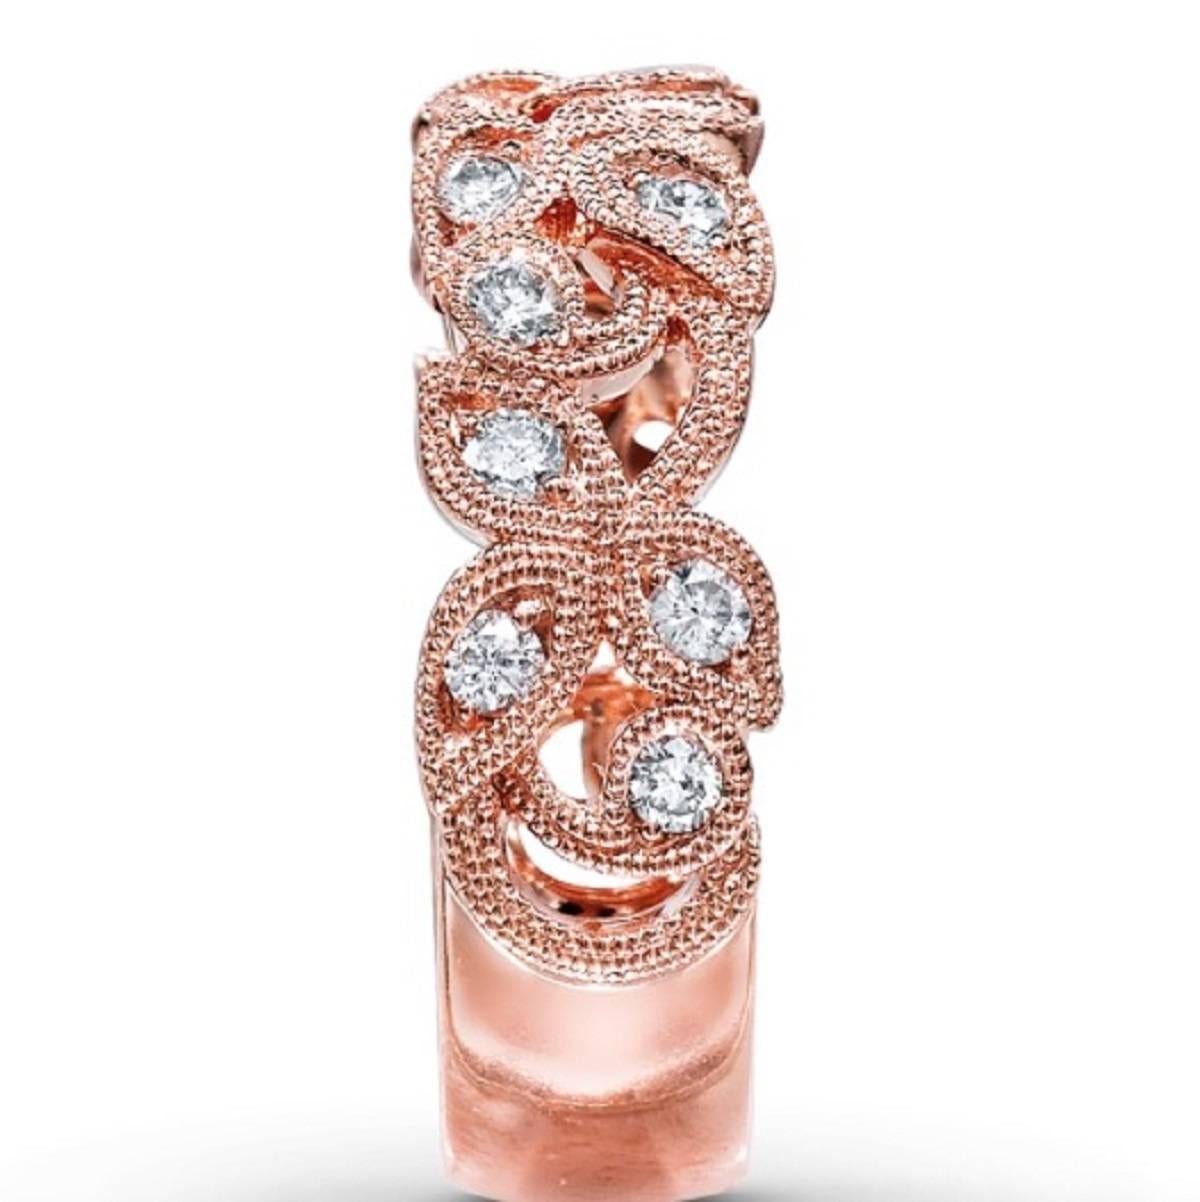 Designs by Neil Lane evoke the splendor of the past with an eye toward the future. In this vintage-inspired diamond ring for her, dazzling round diamonds decorate intricate leaves and vines of 14K rose gold. The ring, from the Neil Lane Designs®